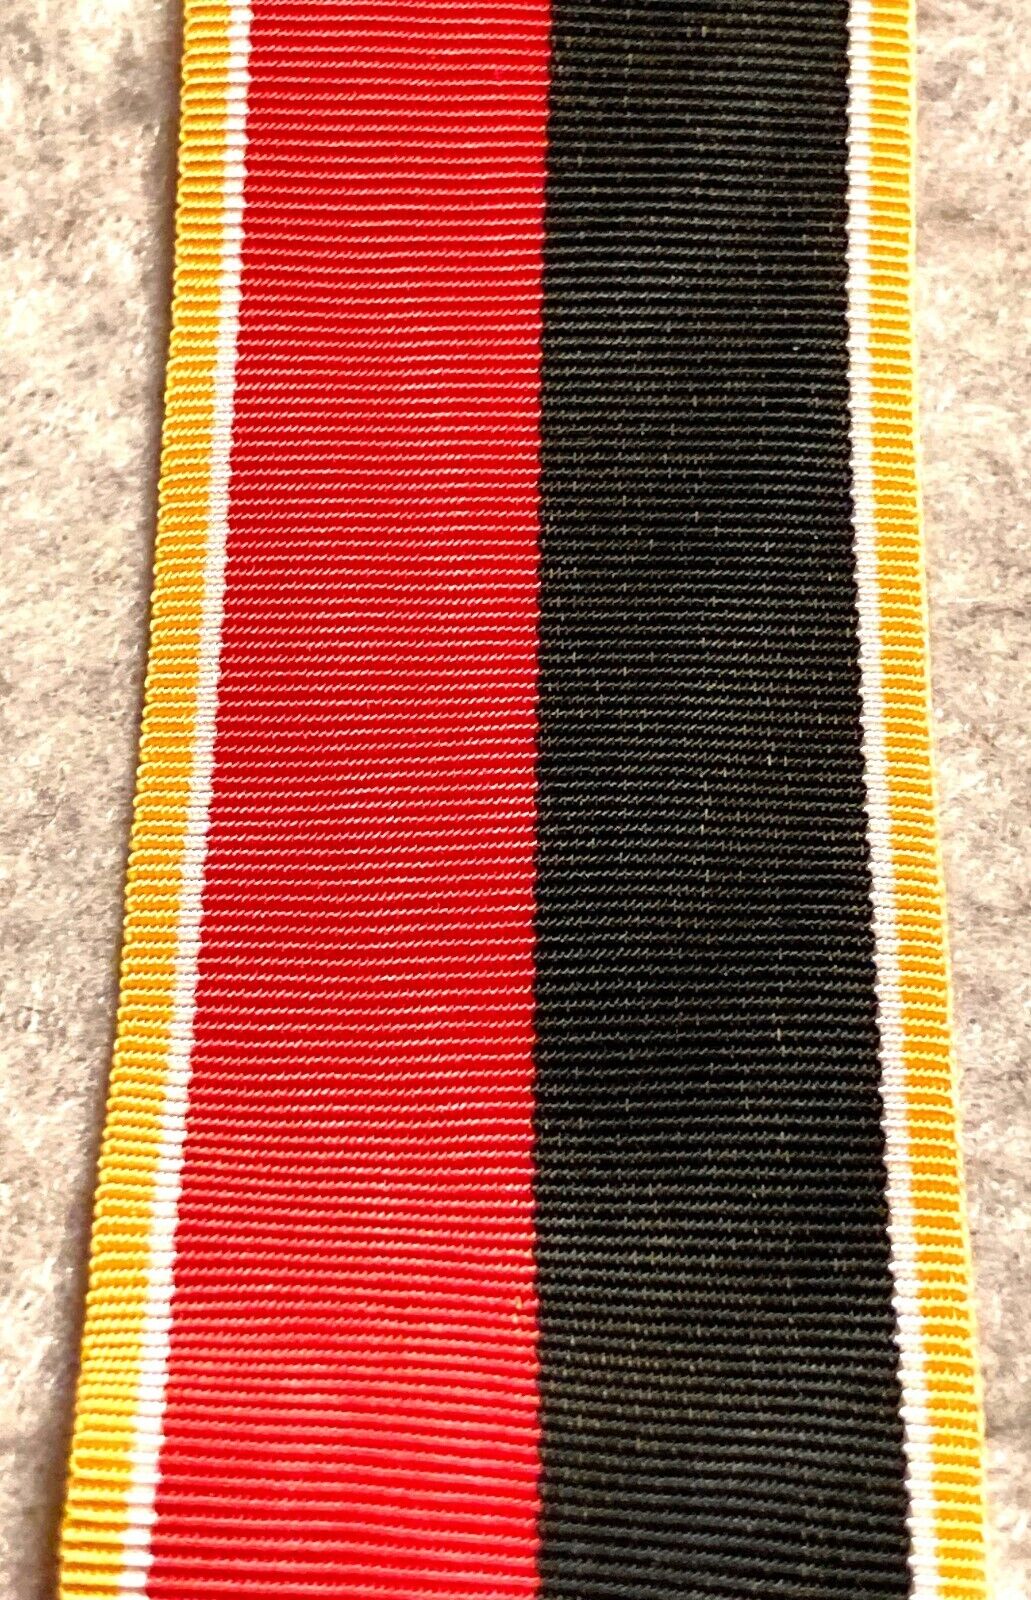 Replacement ribbon for the Ethnic Development medal - RSVN